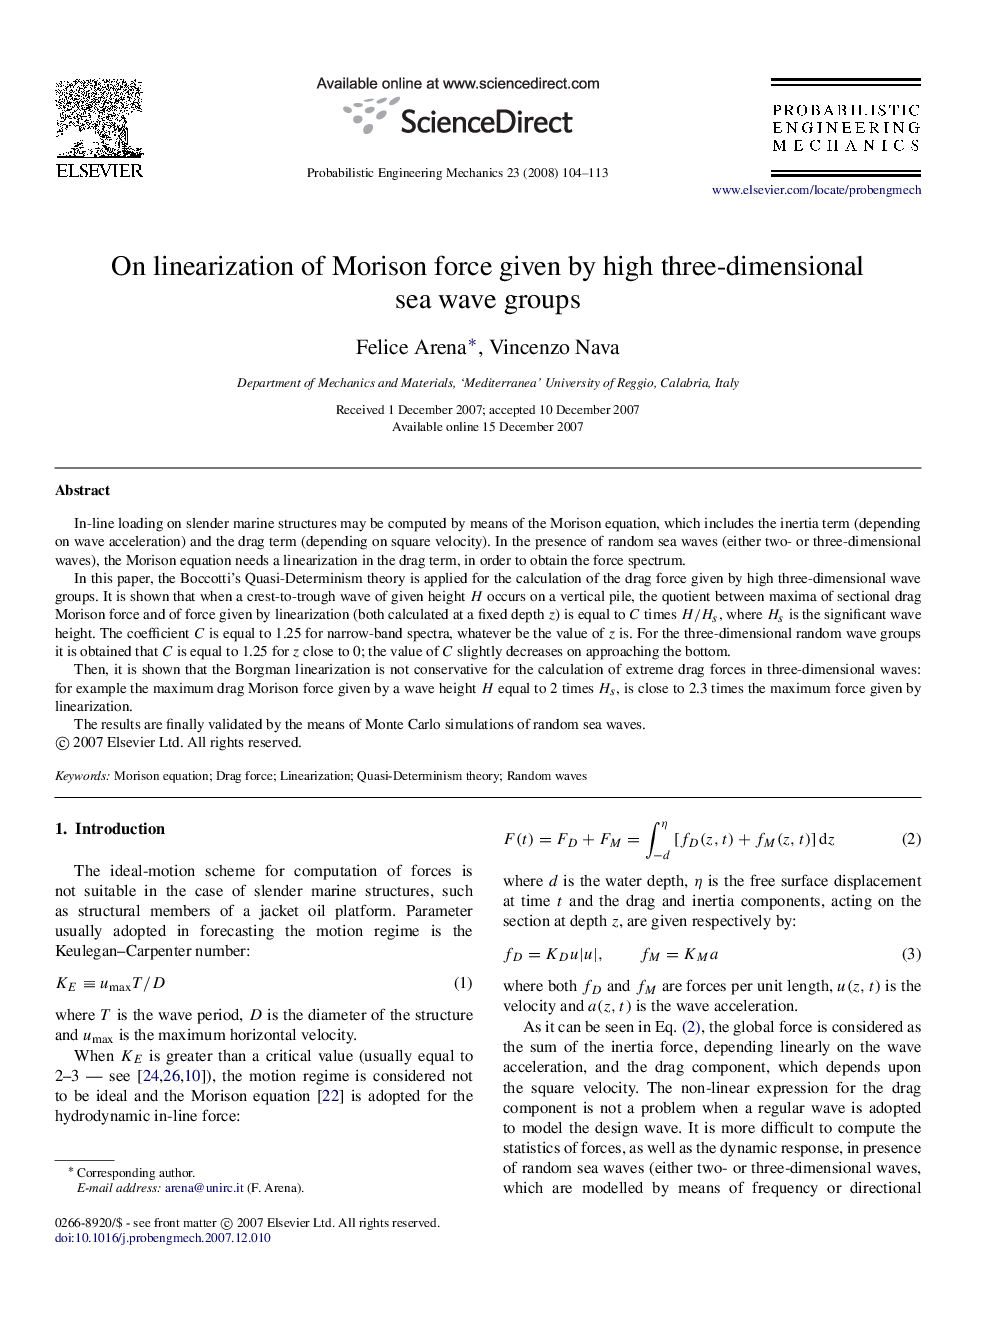 On linearization of Morison force given by high three-dimensional sea wave groups